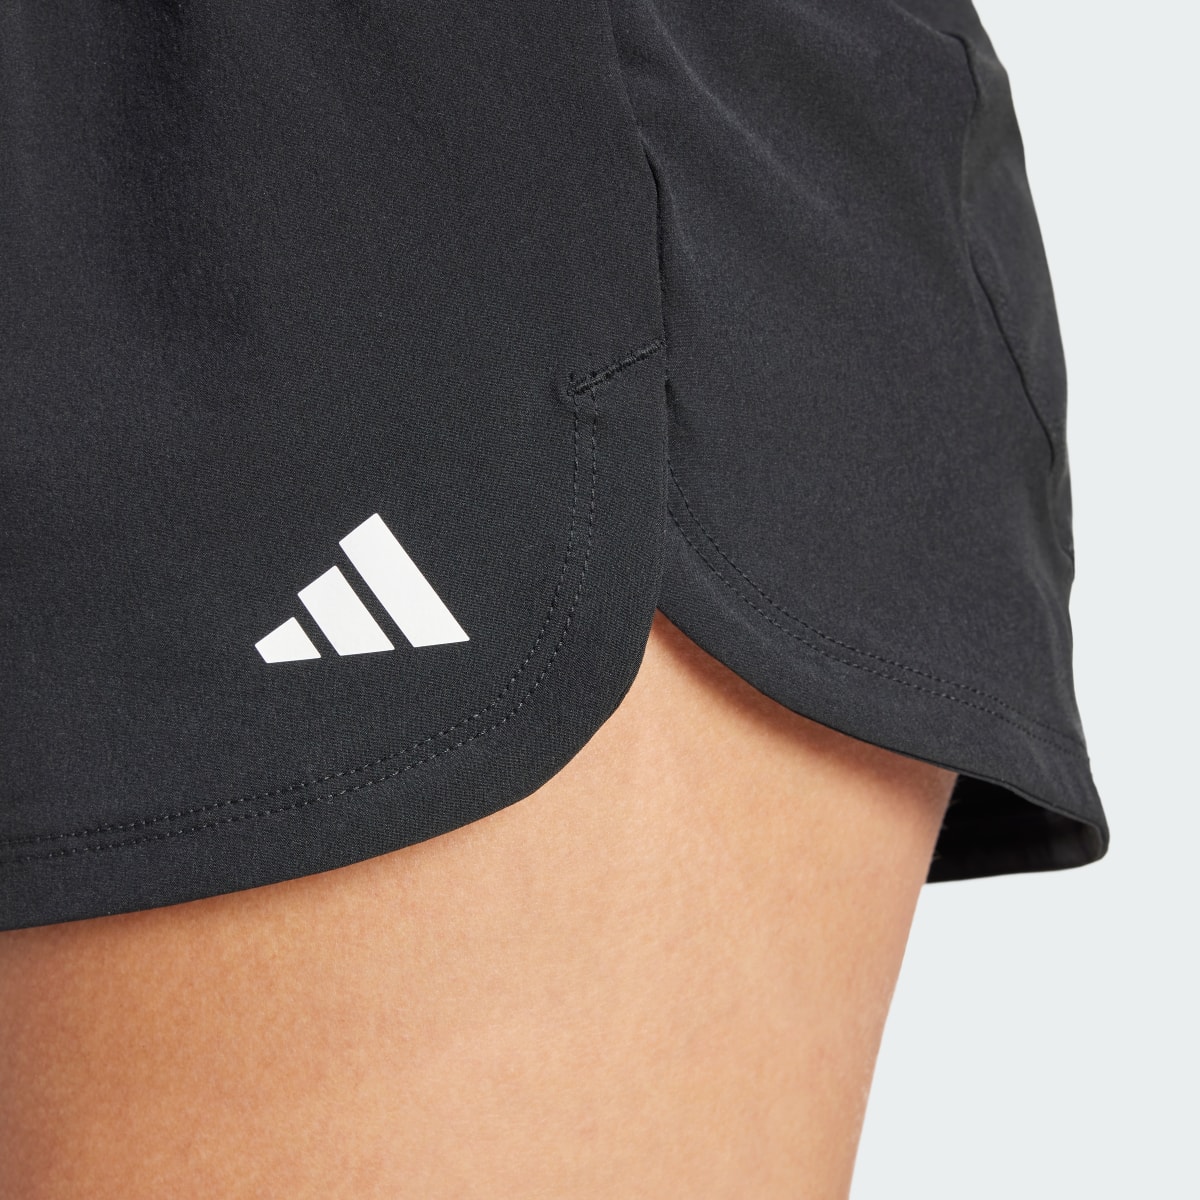 Adidas Pacer Woven Stretch Training Maternity Shorts. 6